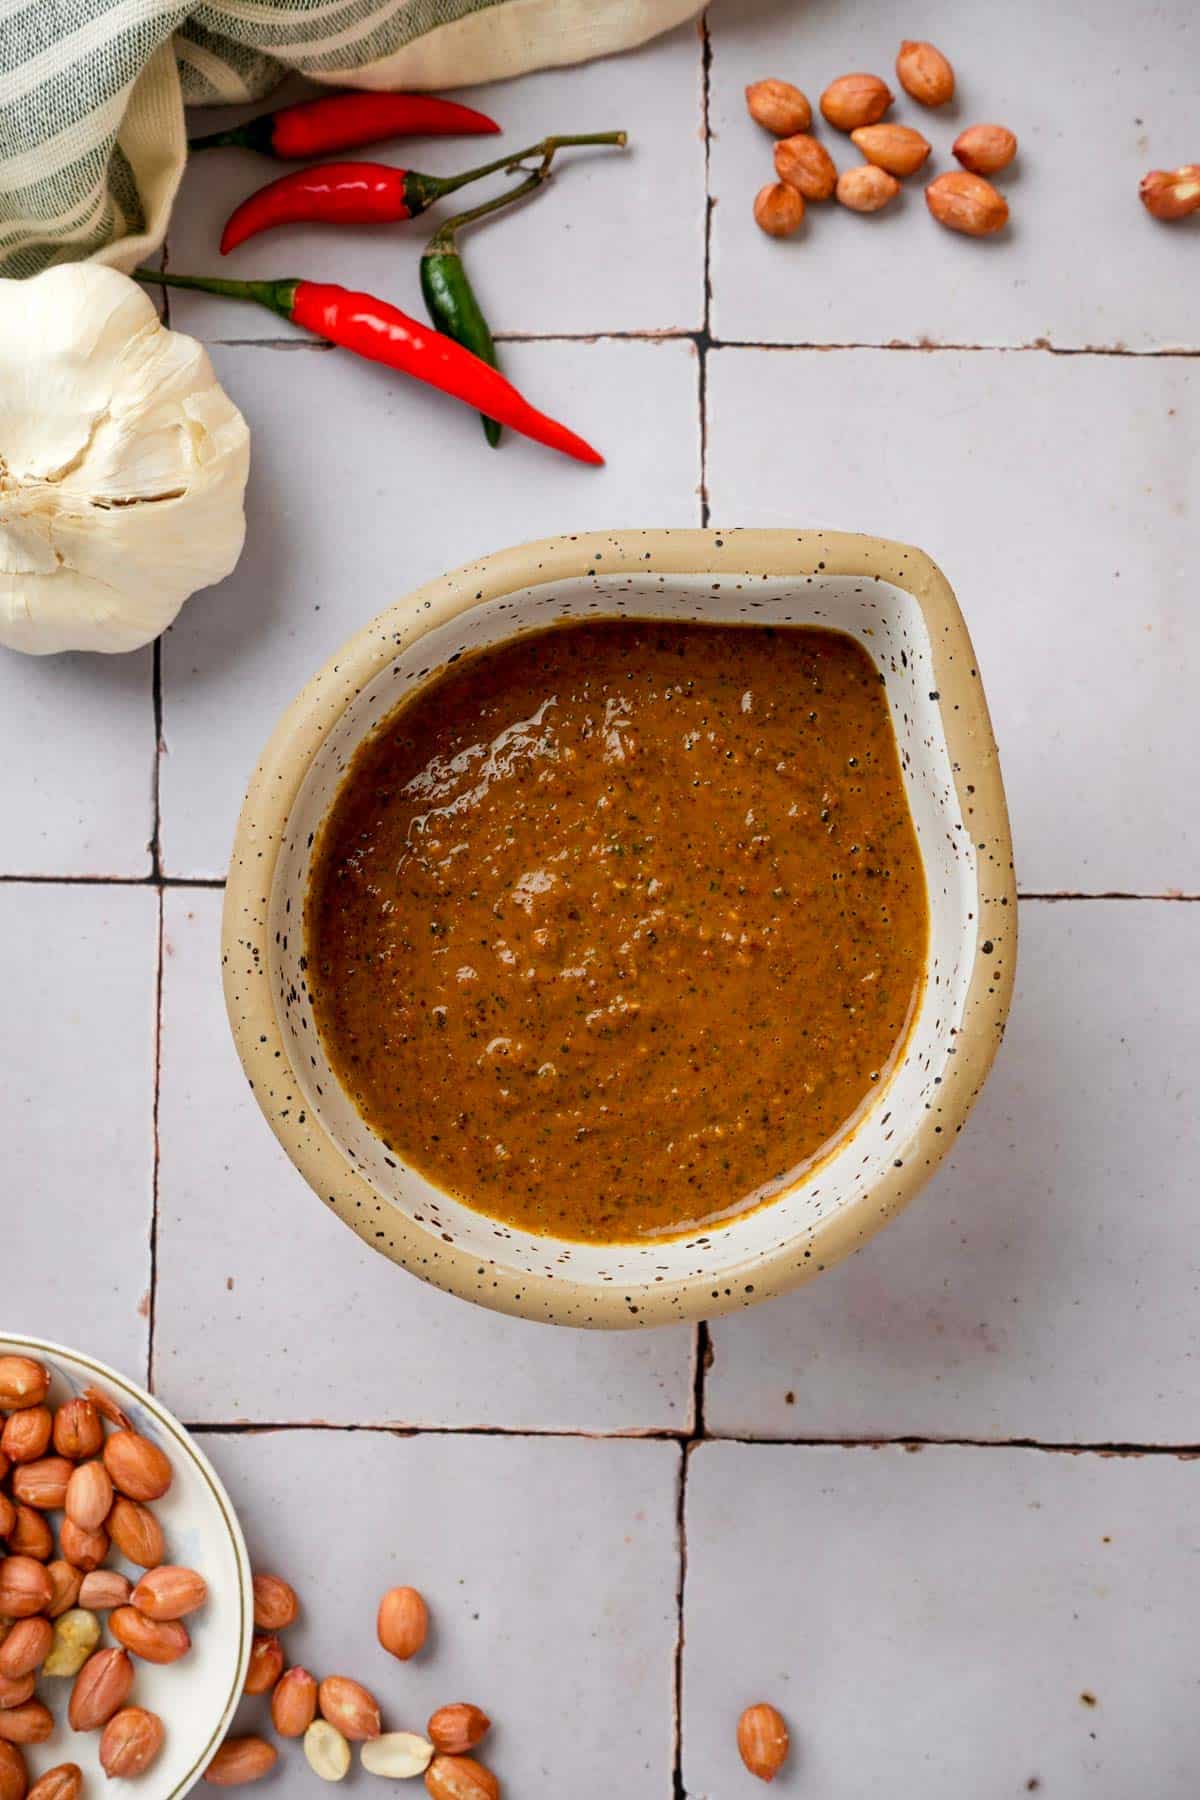 brown peanut sauce in a bowl